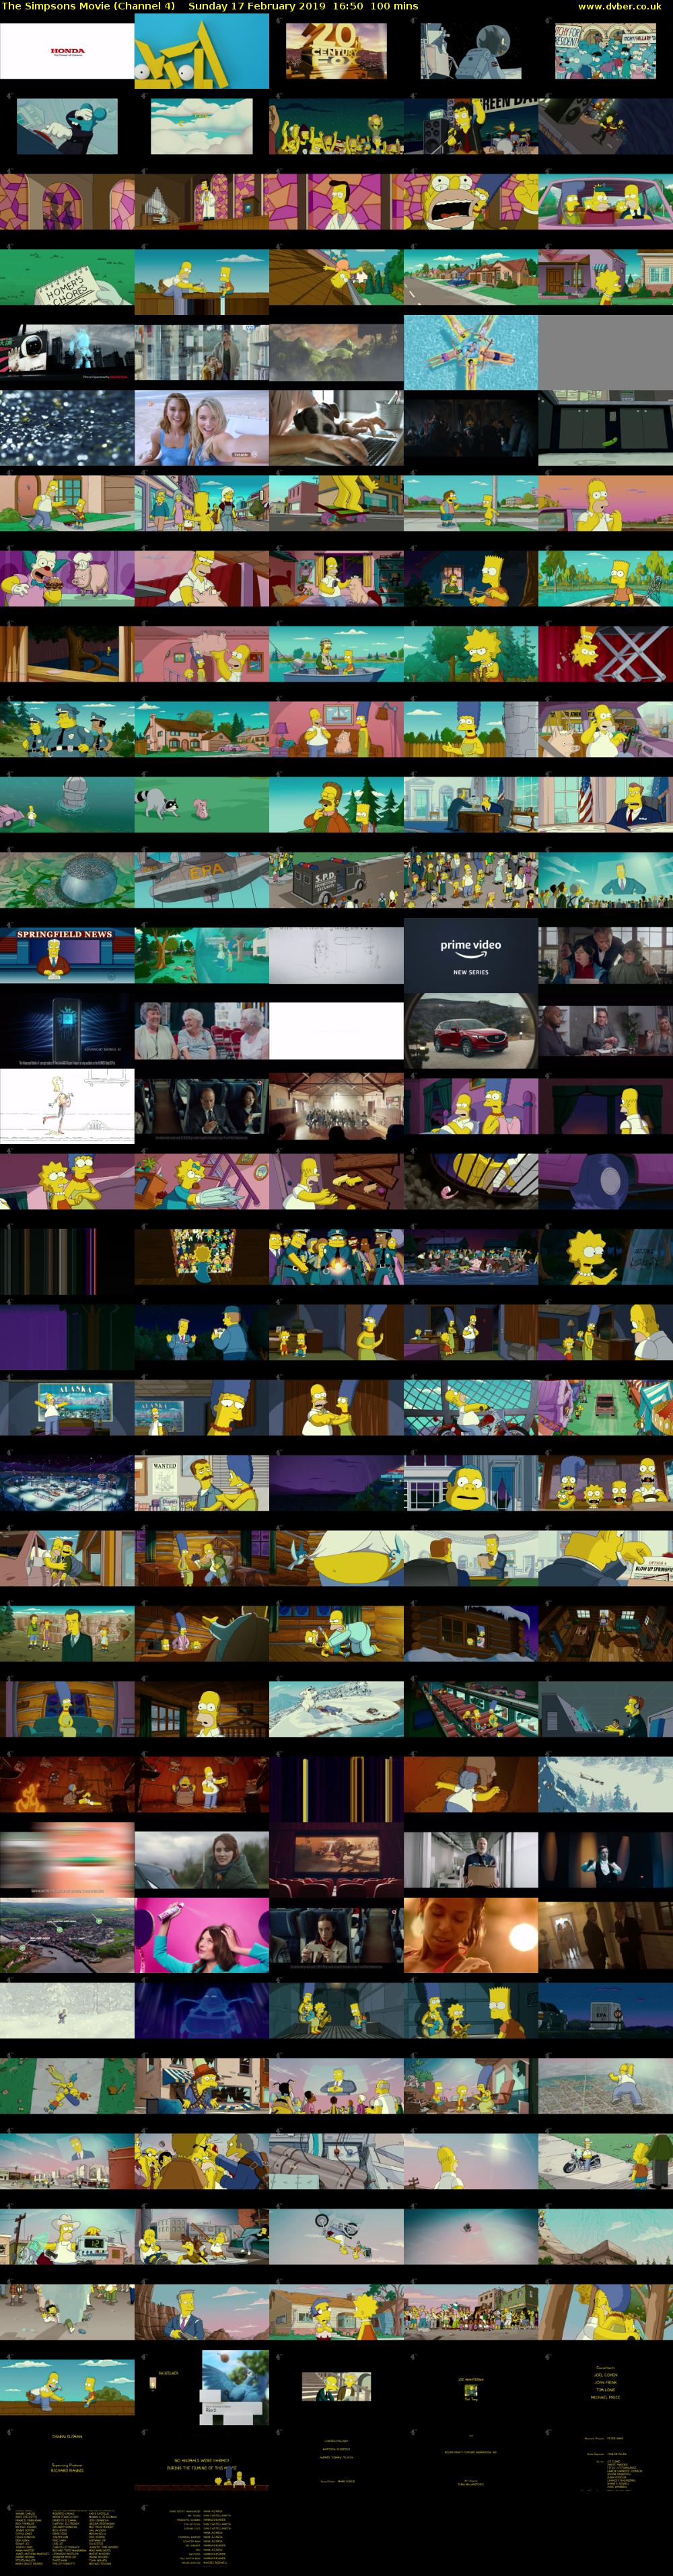 The Simpsons Movie (Channel 4) Sunday 17 February 2019 16:50 - 18:30